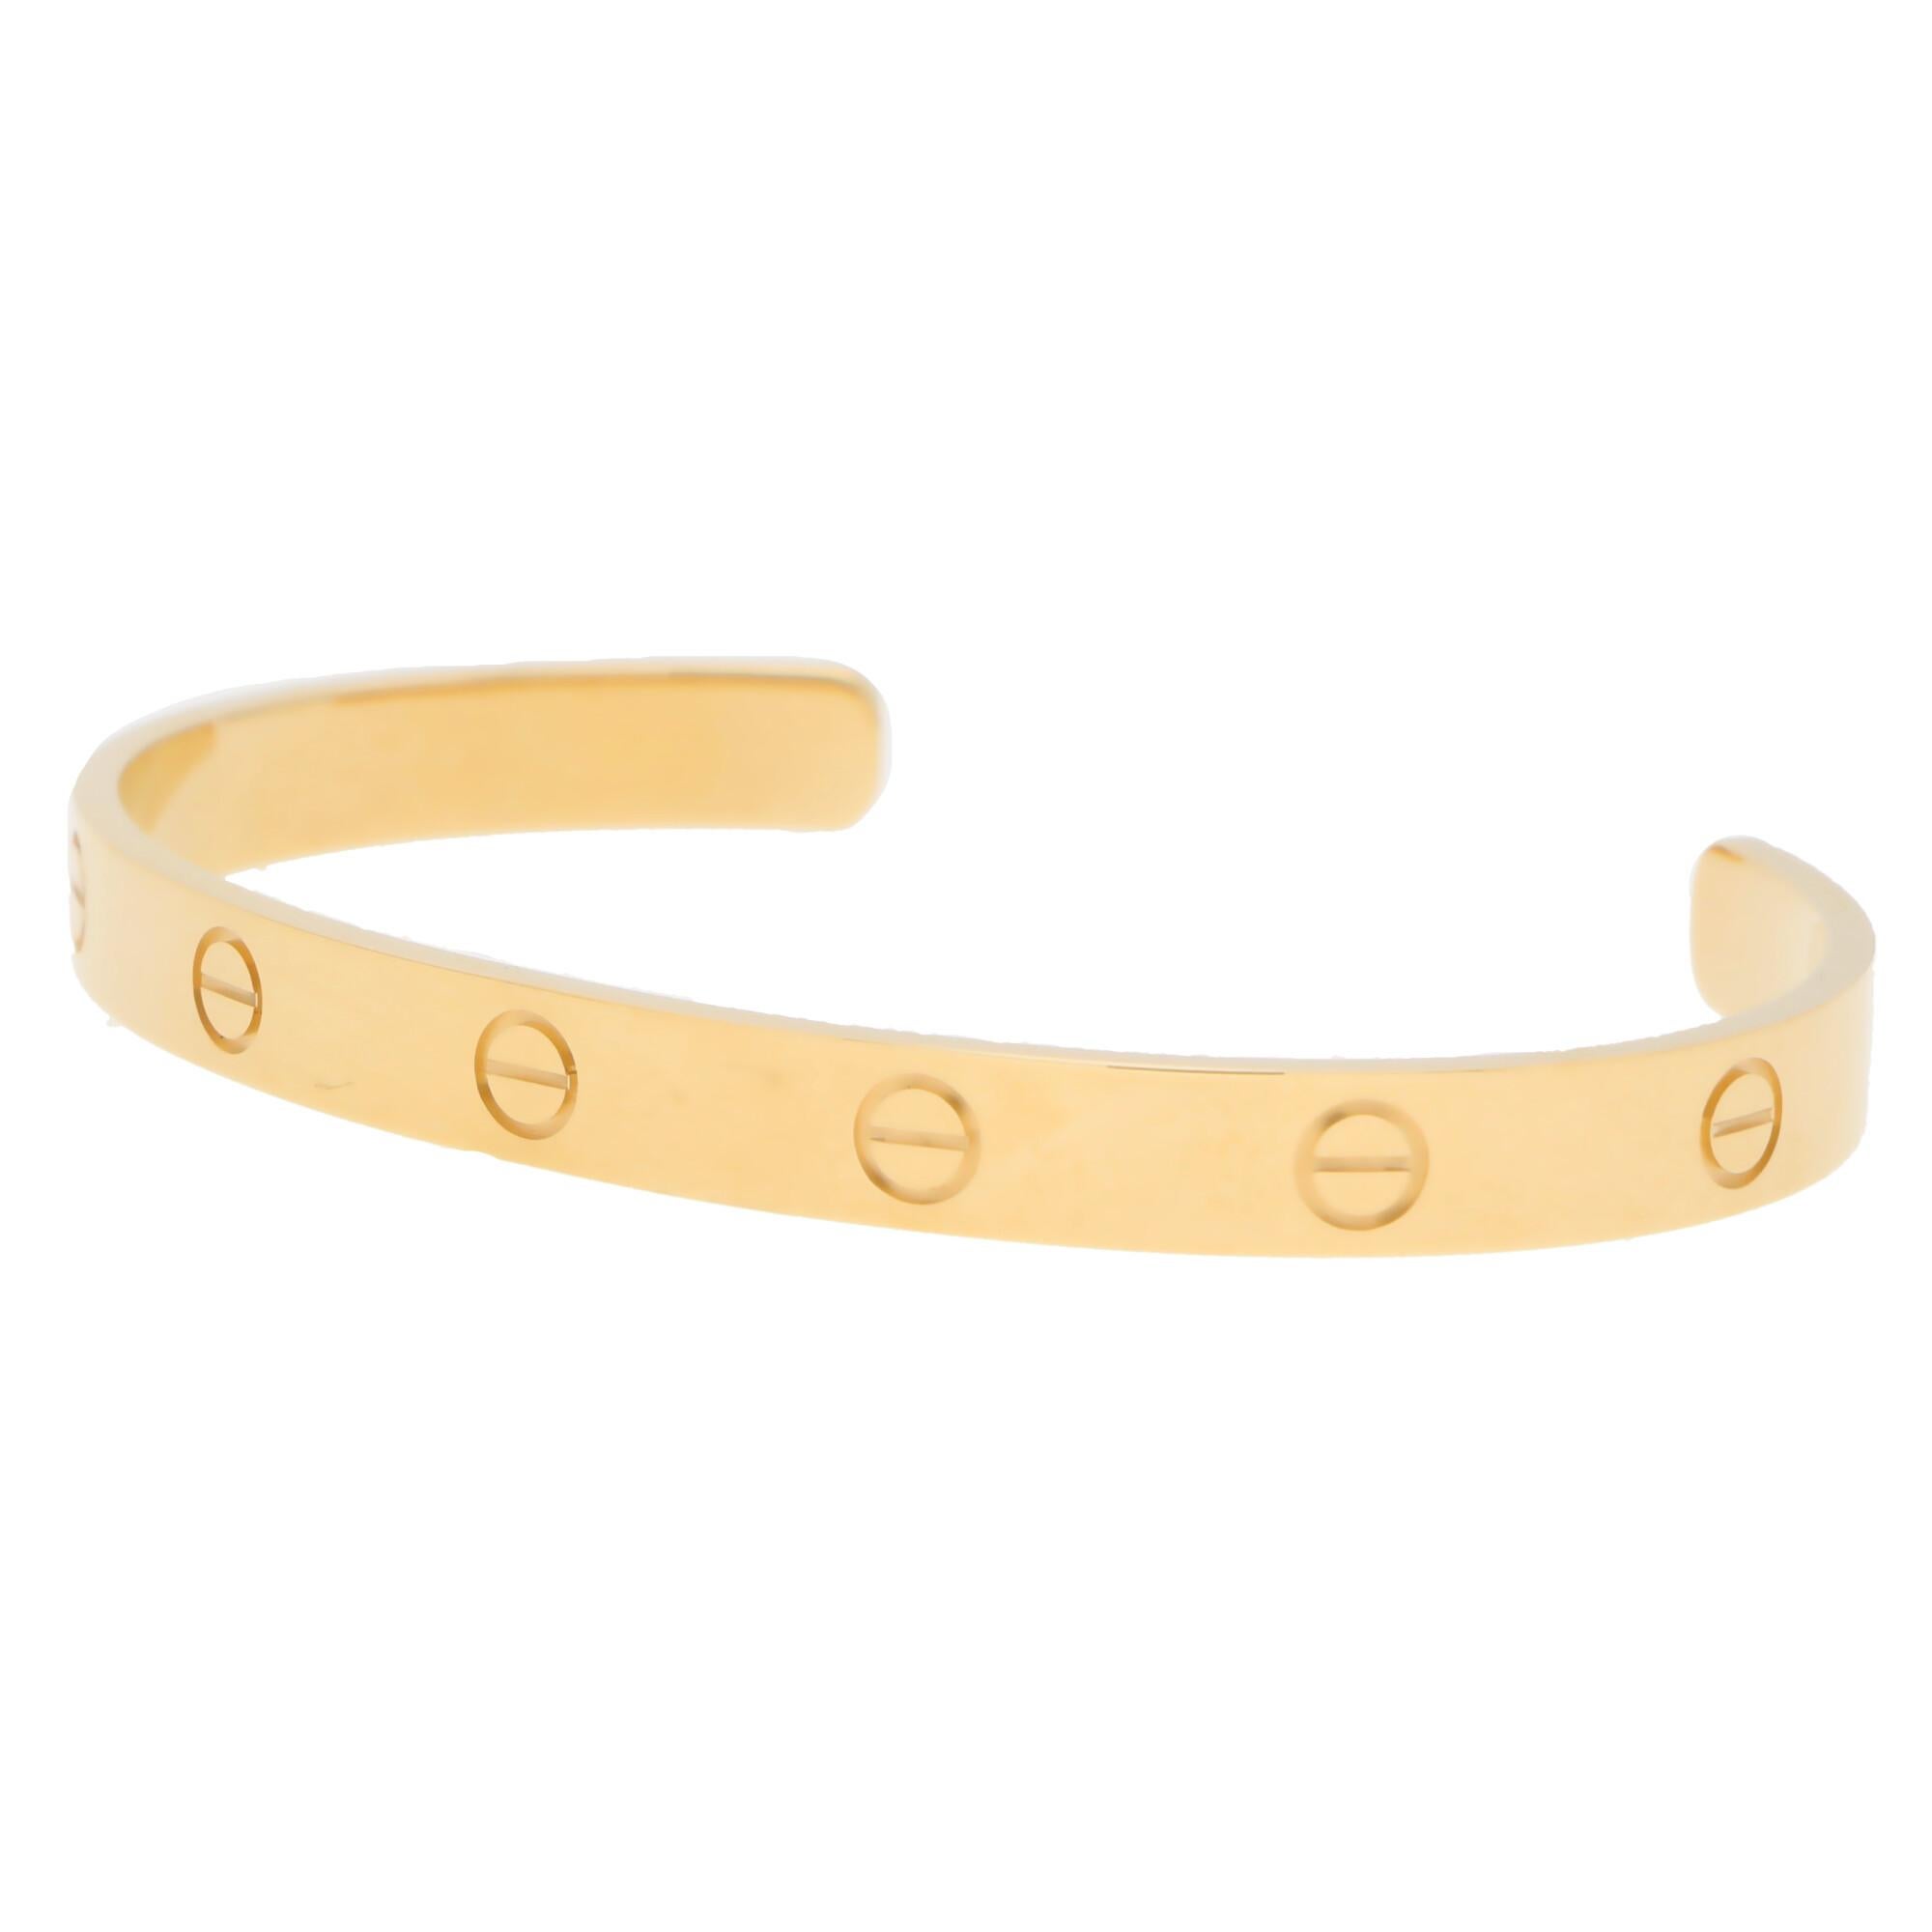 Modern Vintage Cartier LOVE U Bangle Set in 18k Yellow Gold, with Box and Certificate